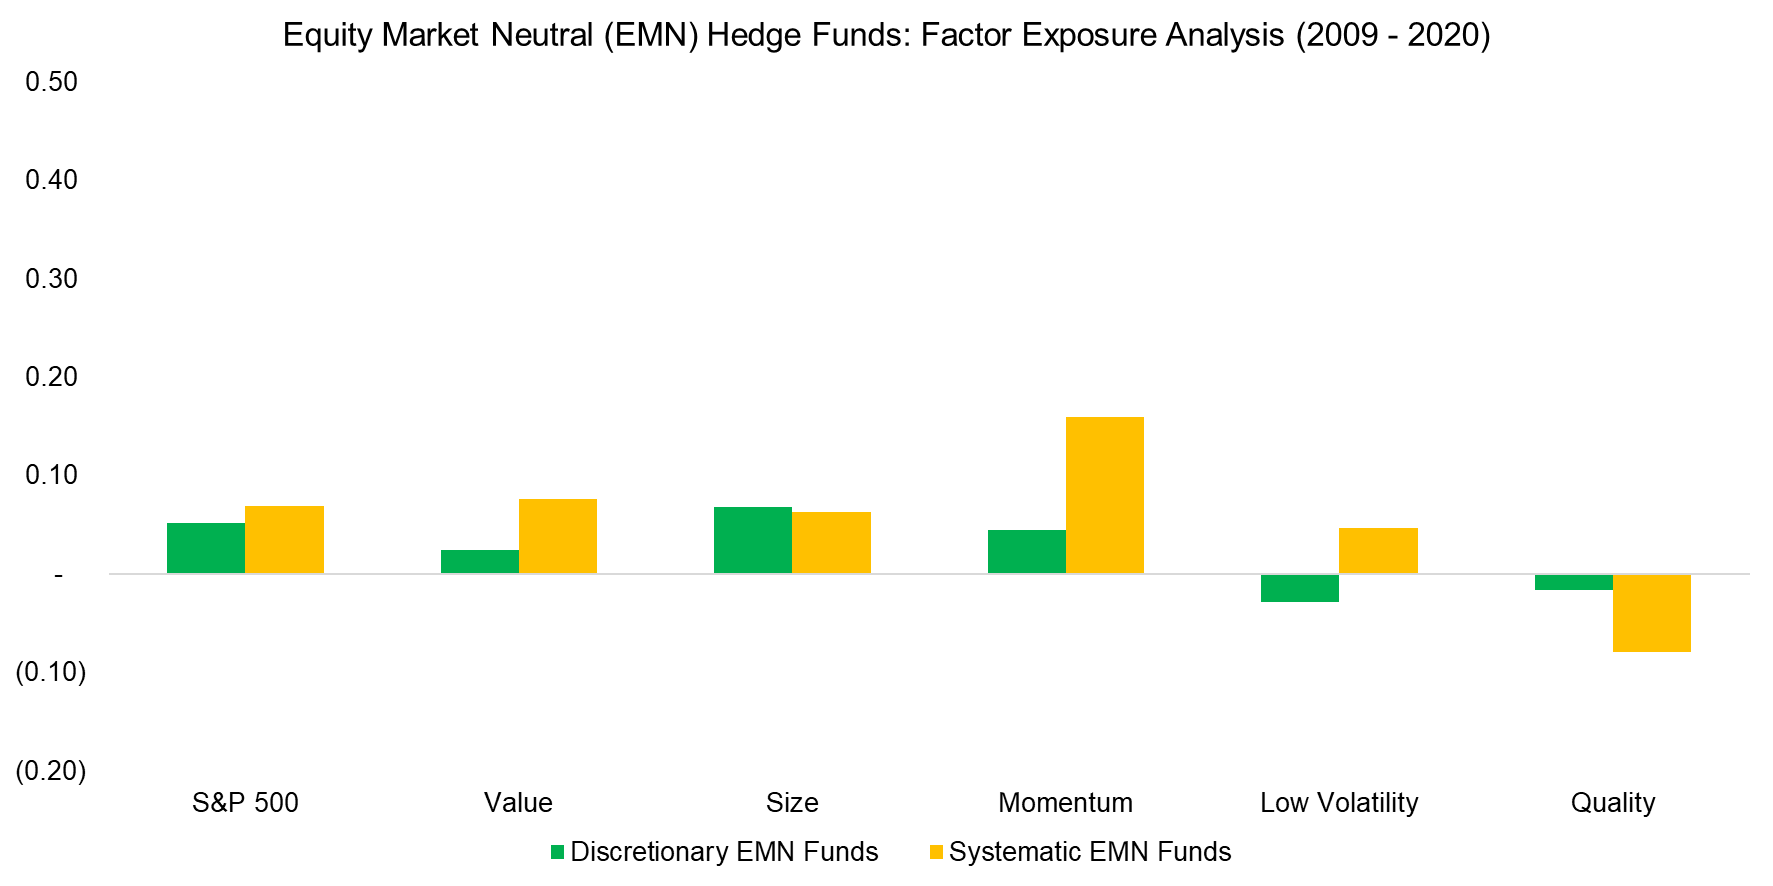 Equity Market Neutral (EMN) Hedge Funds Factor Exposure Analysis (2009 - 2020)